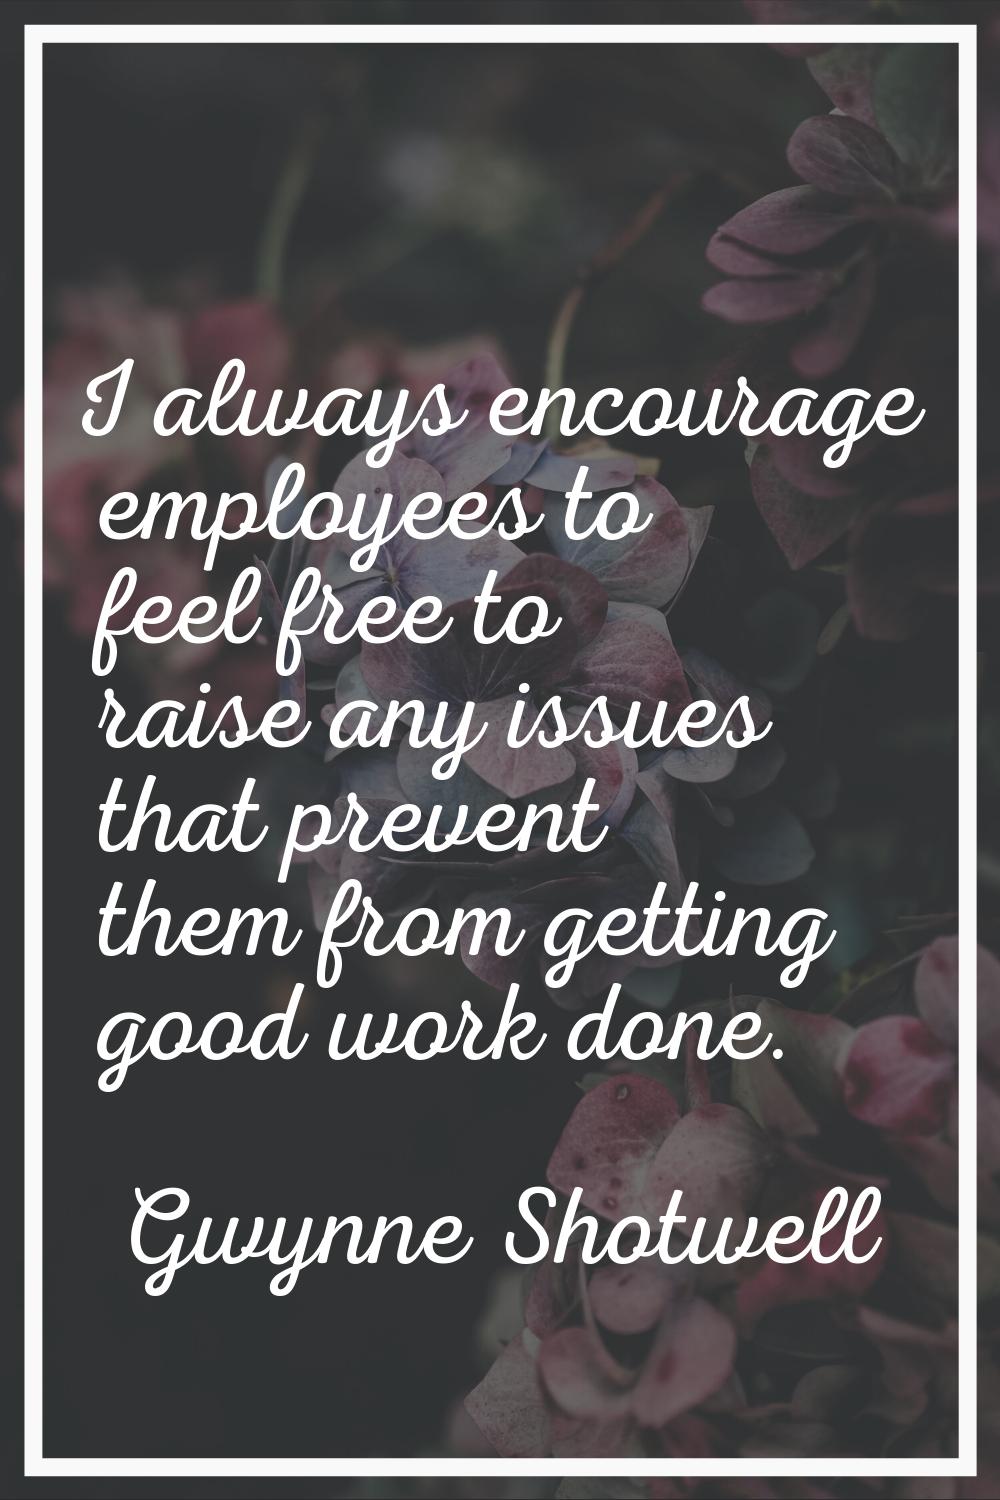 I always encourage employees to feel free to raise any issues that prevent them from getting good w